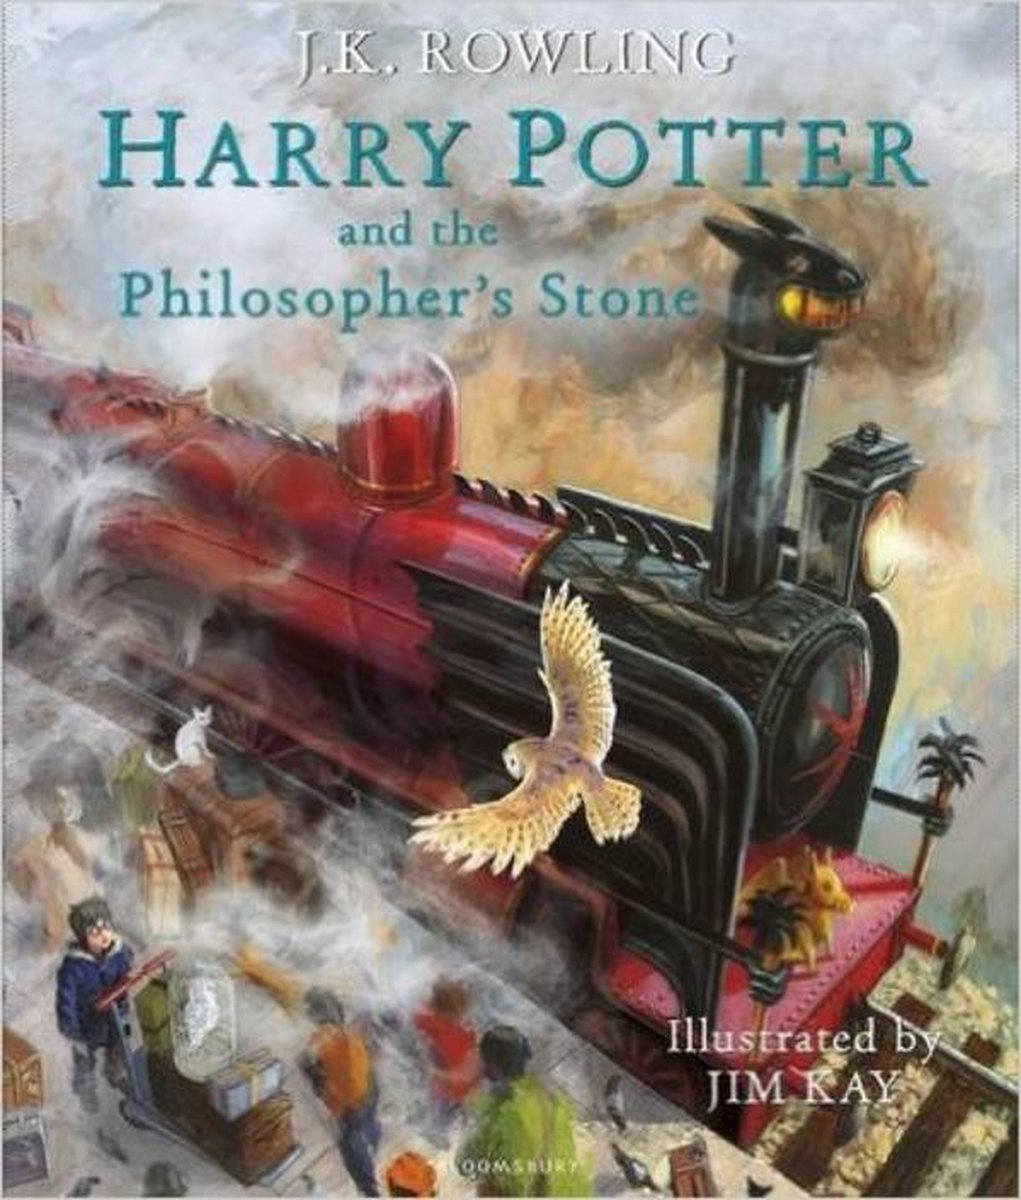 Harry Potter 1 - Harry Potter and the Philosopher's Stone | Illustrated Edition - J.K. Rowling